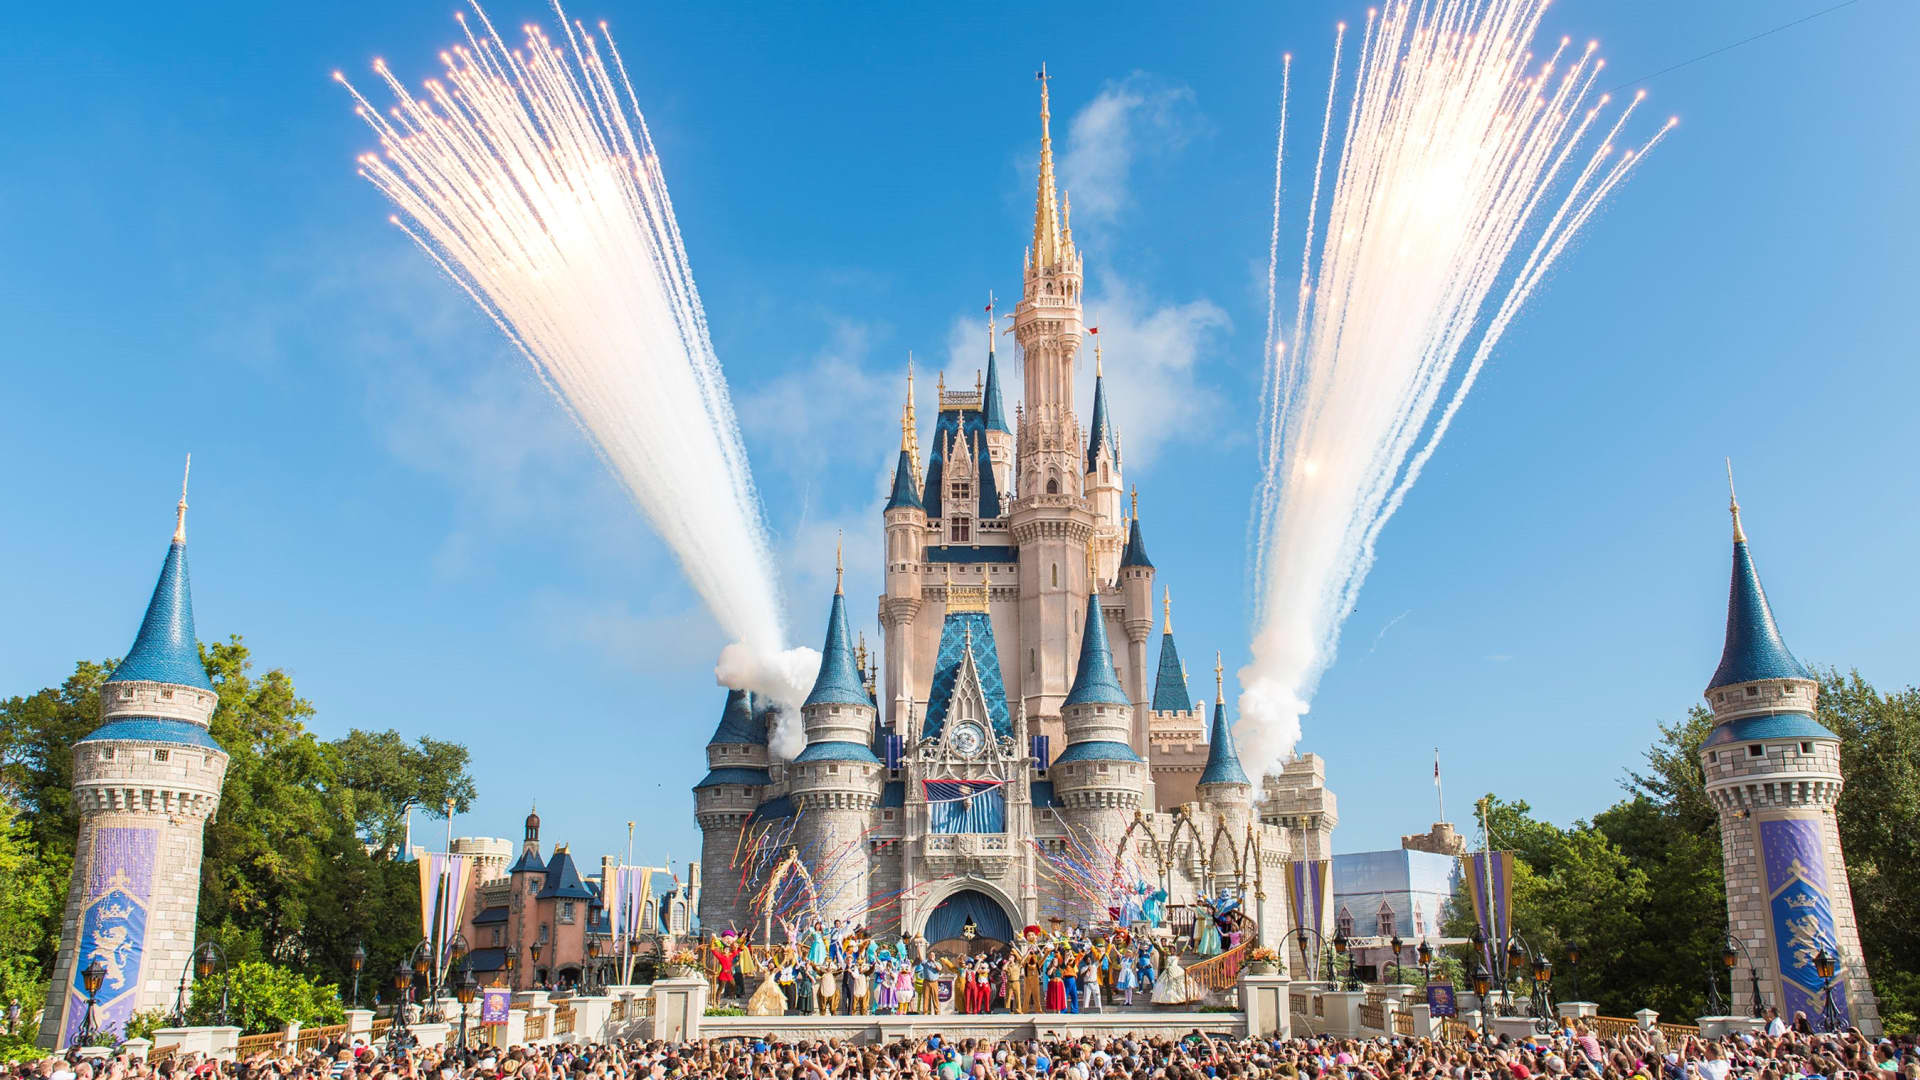 An uphill battle could await activist Trian as the firm snaps up a stake in Disney